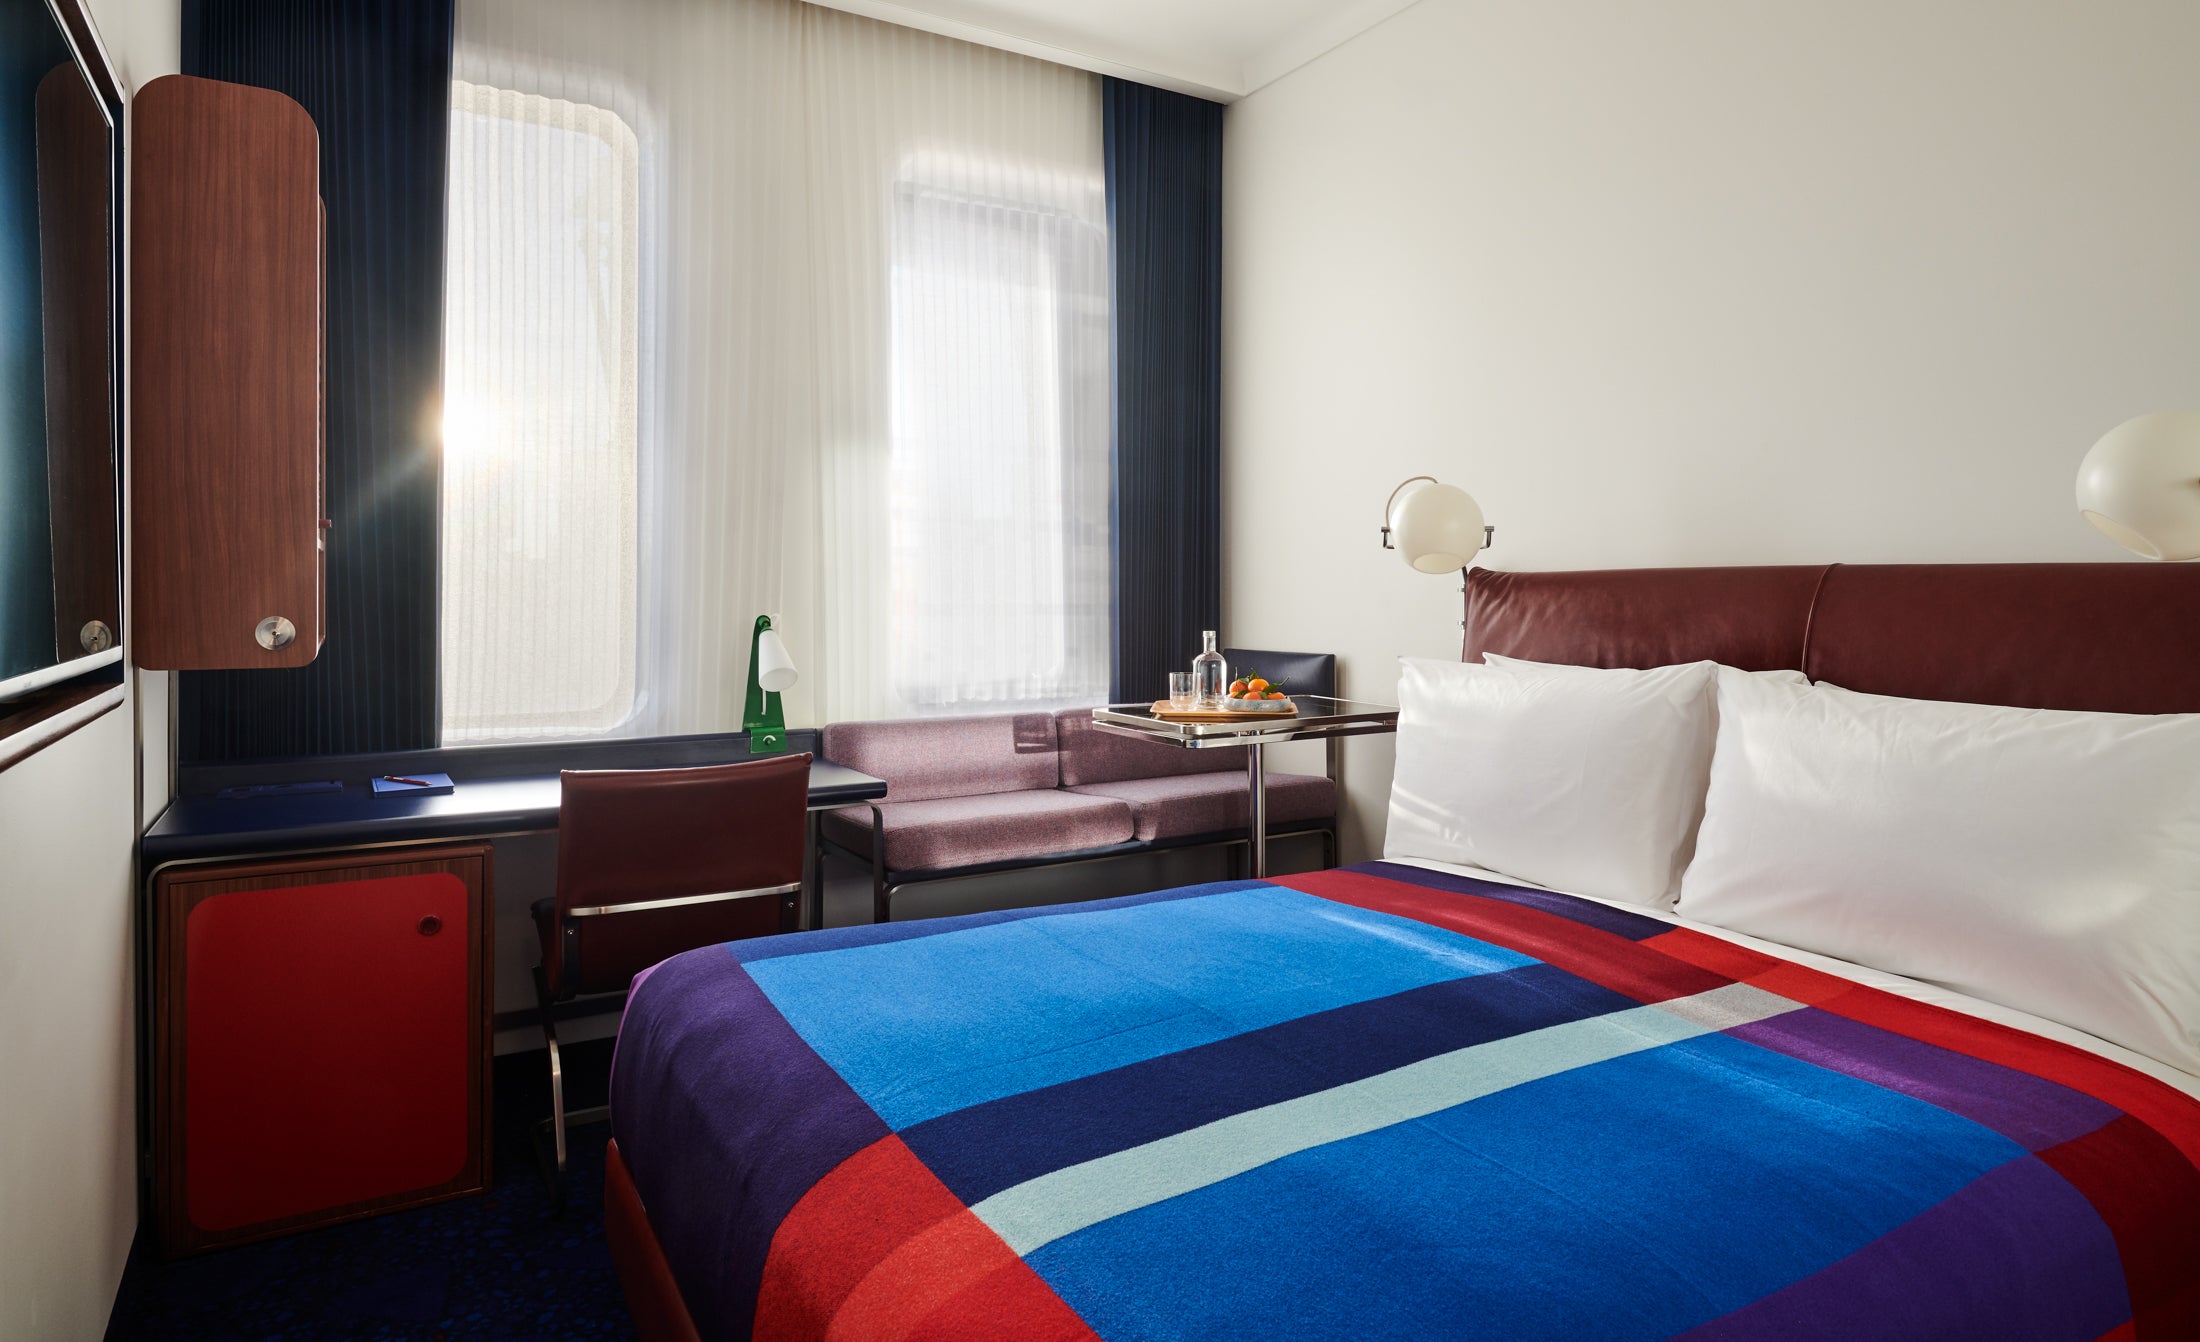 Pops of colour at this anything-but-standard hotel